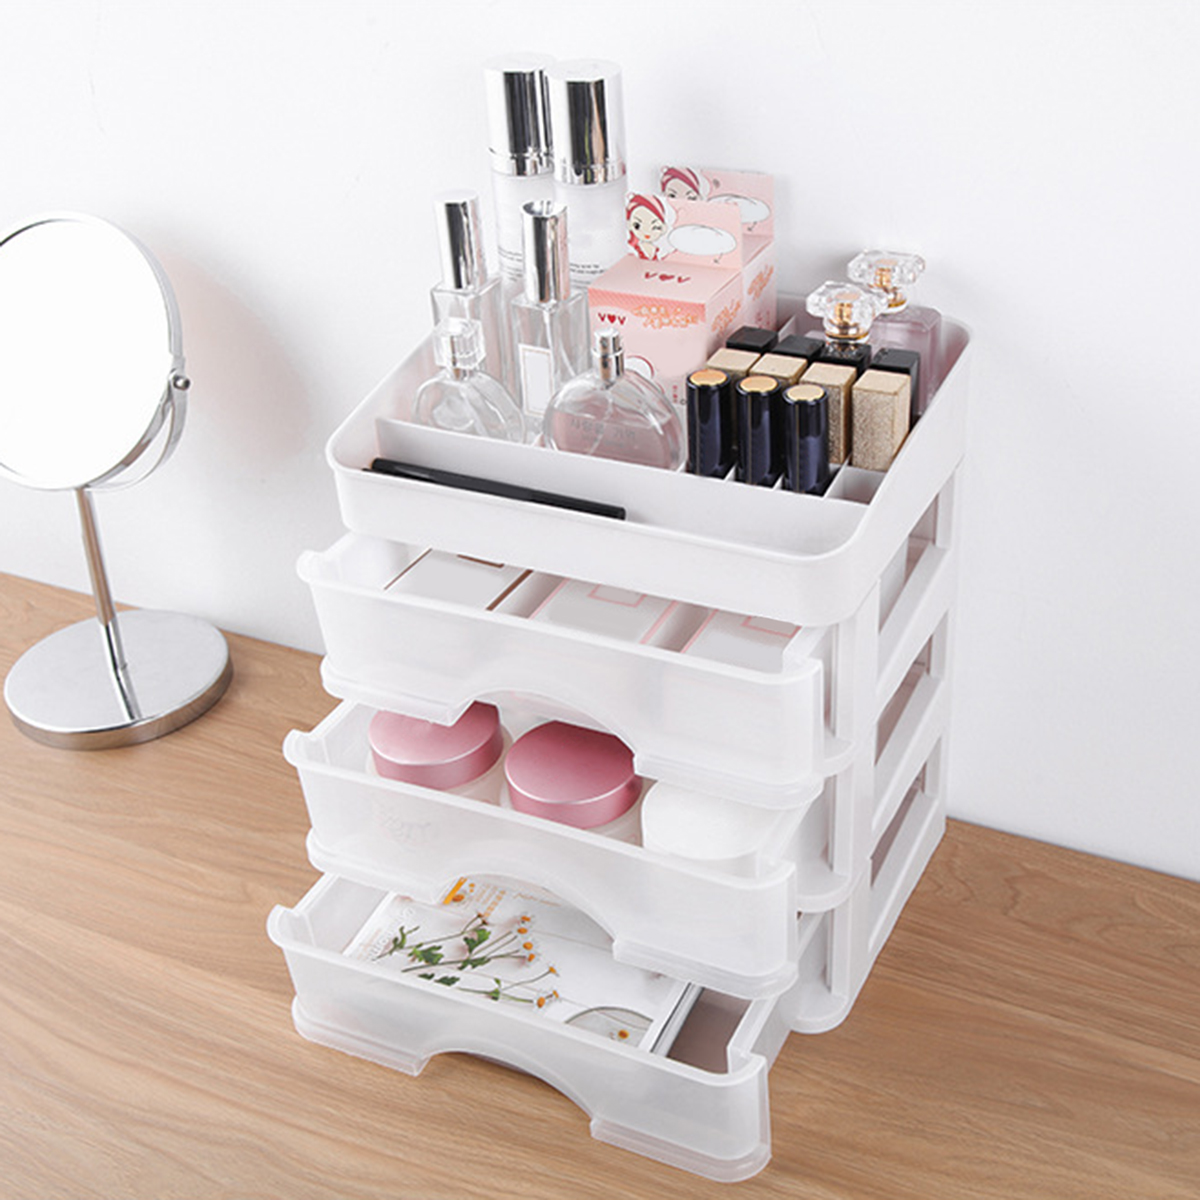 Plastic-Cosmetic-Drawer-Makeup-Organizer-Storage-Box-Container-Holder-Desktop-with-Drawer-1708816-8